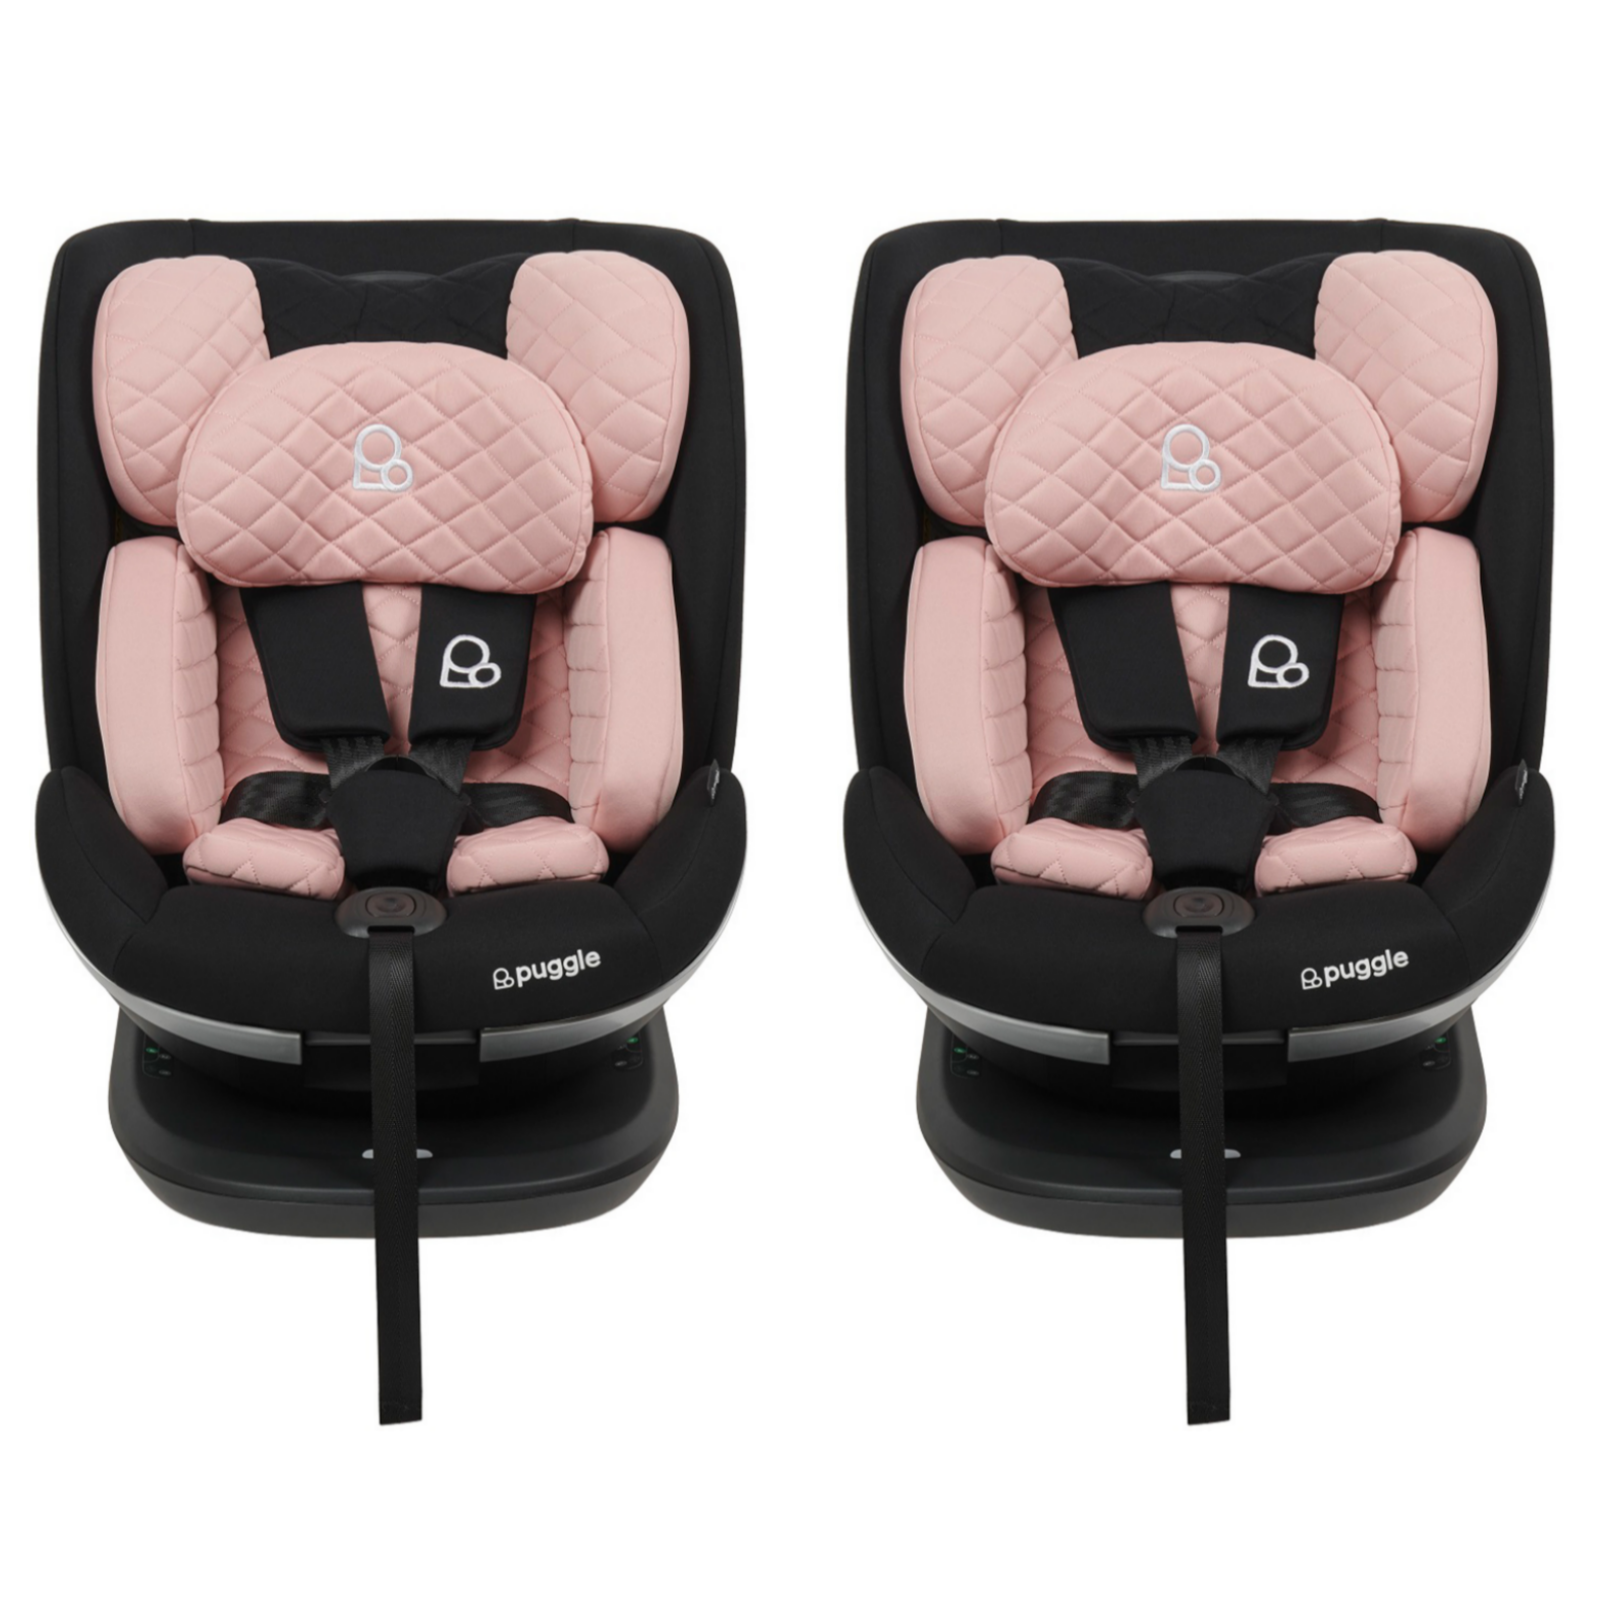 Puggle i-Size Safe Max Luxe Group 0+123 360° Rotate Car Seat (2 Pack) - Blush Pink